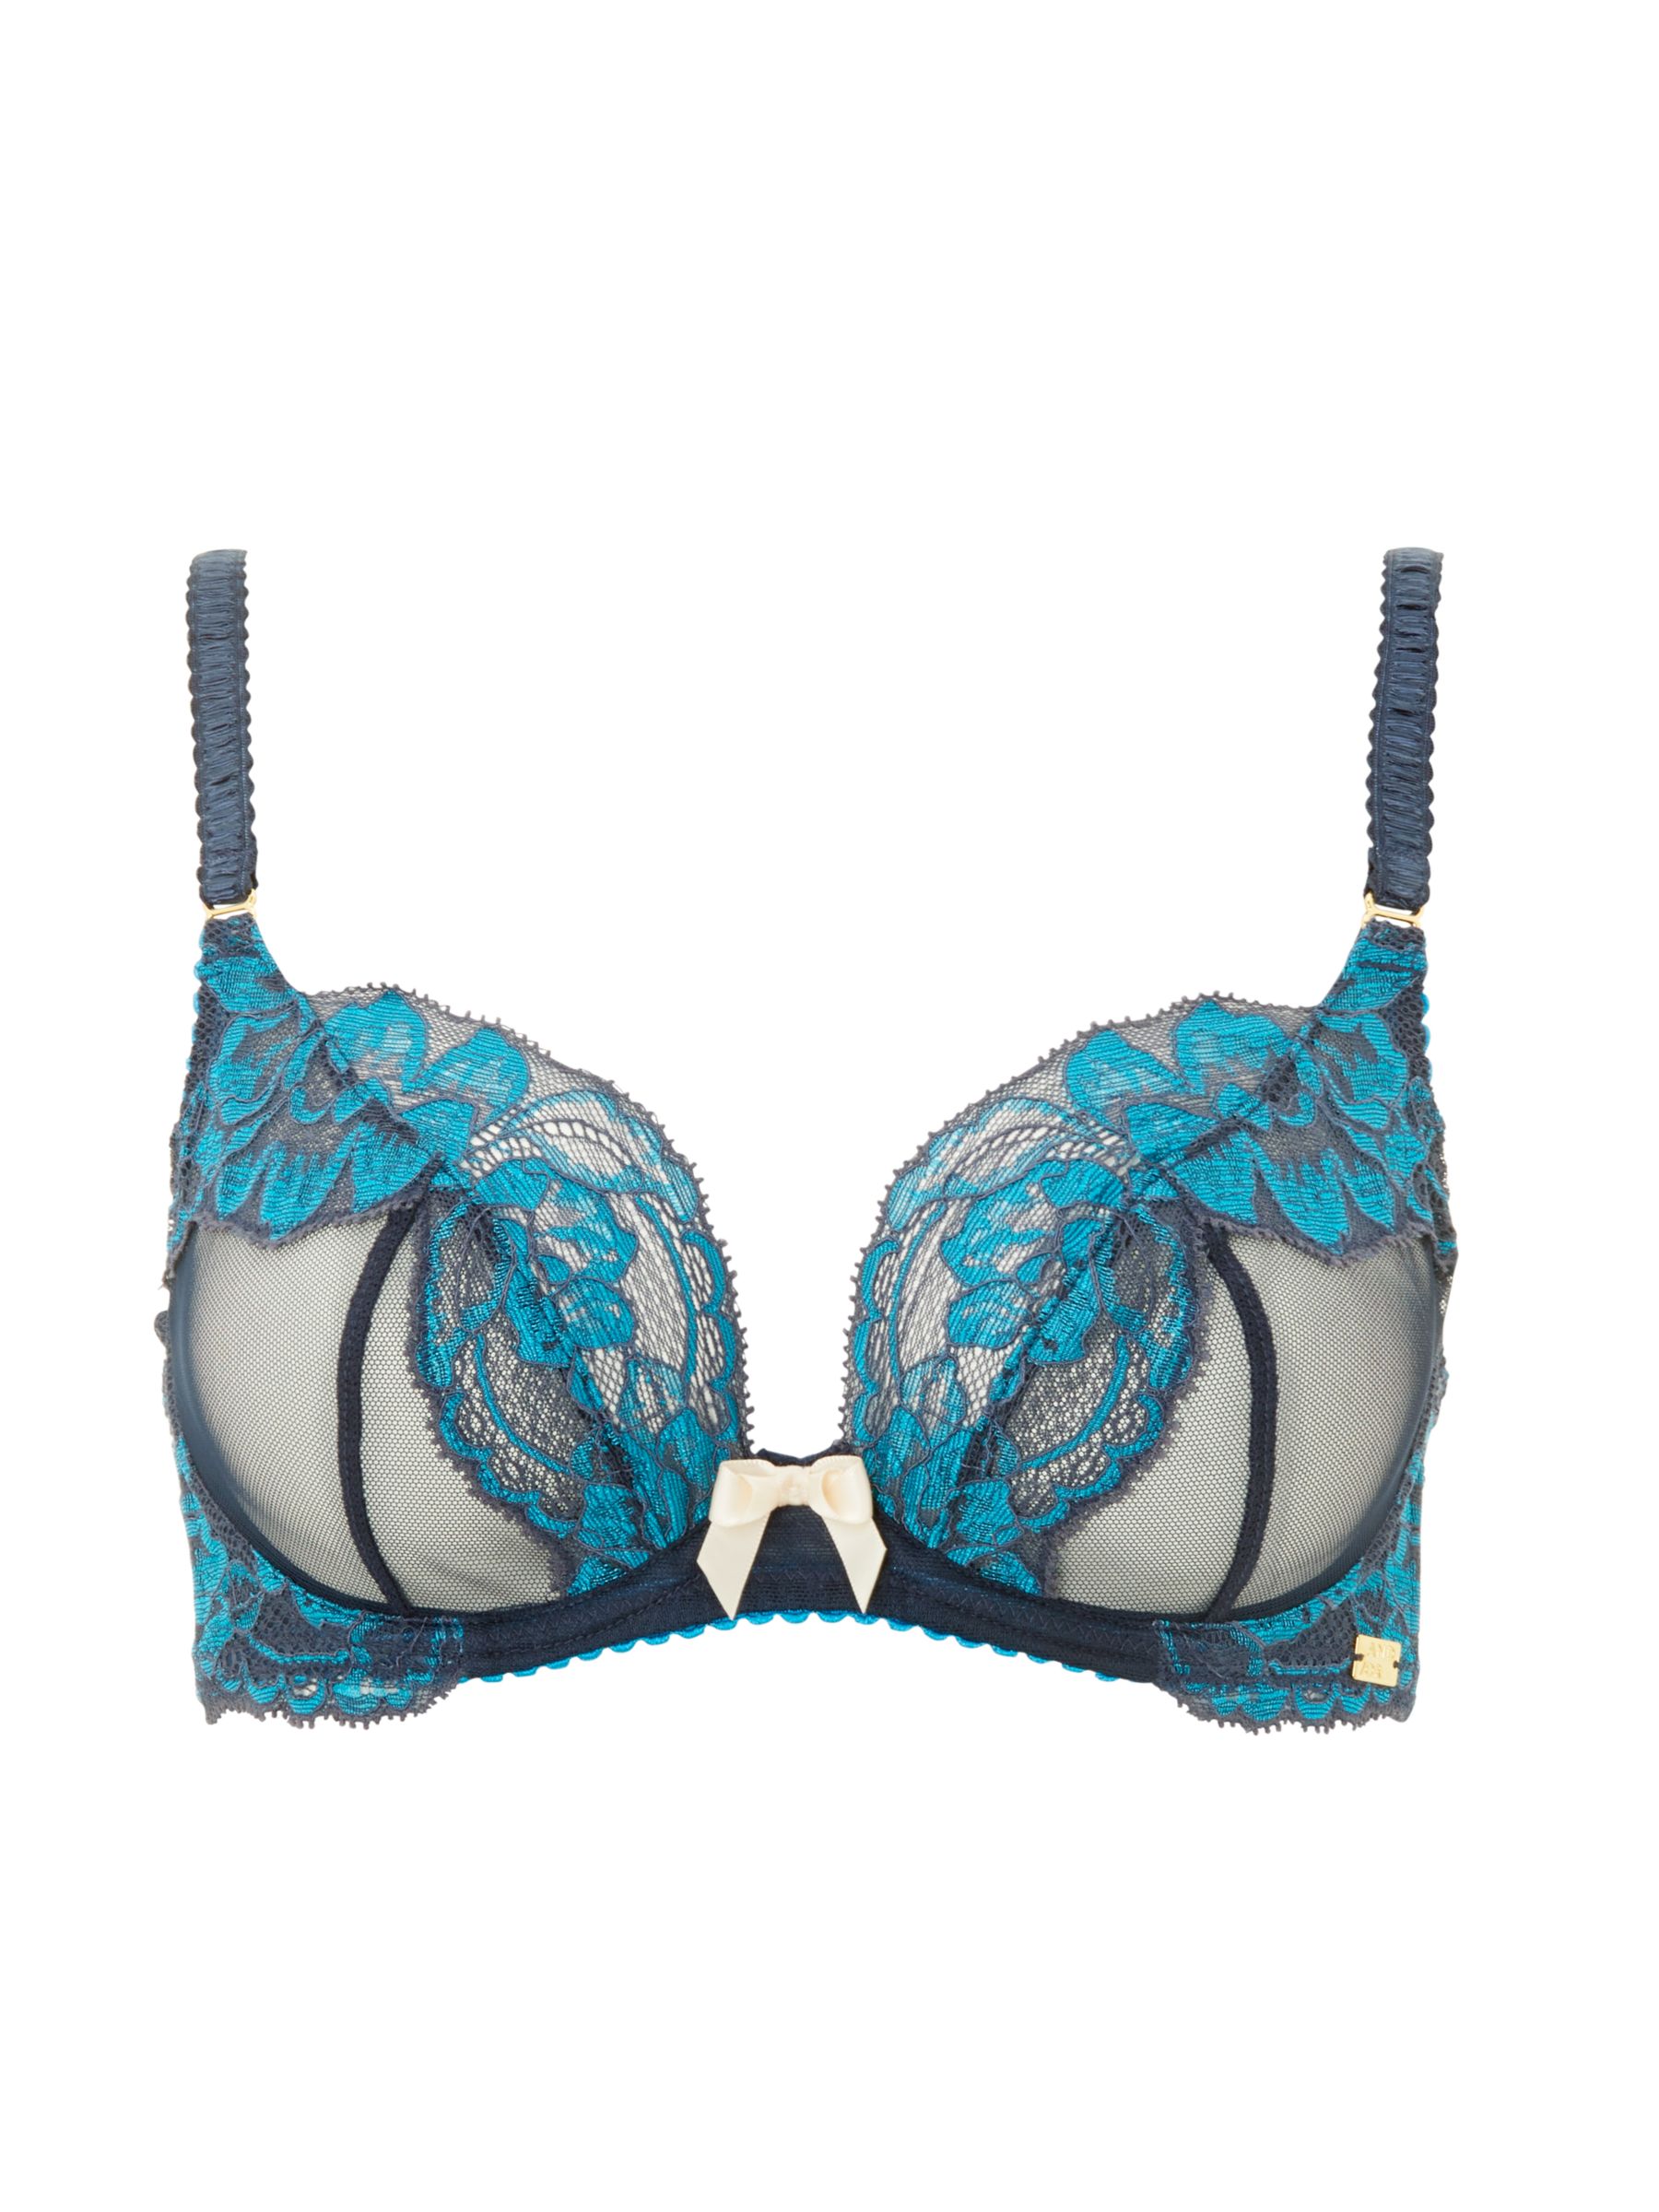 AND/OR Valentina Lace Plunge Bra, Deep Passion